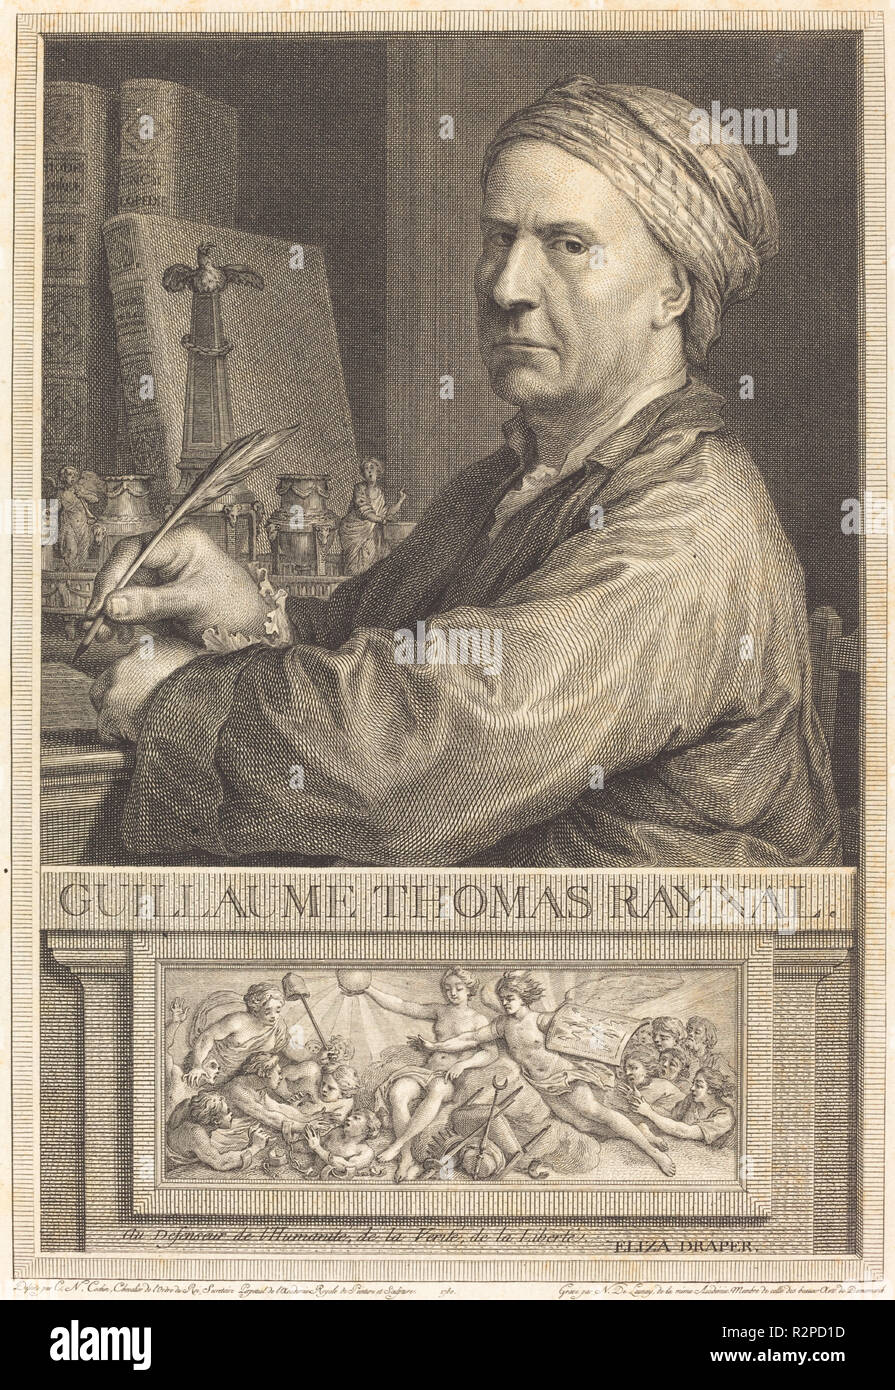 Guillaume Thomas Raynal. Dated: 1780. Dimensions: sheet: 25.7 x 19.3 cm (10 1/8 x 7 5/8 in.). Medium: engraving on laid paper. Museum: National Gallery of Art, Washington DC. Author: Nicolas Delaunay after Charles-Nicolas Cochin II. Stock Photo